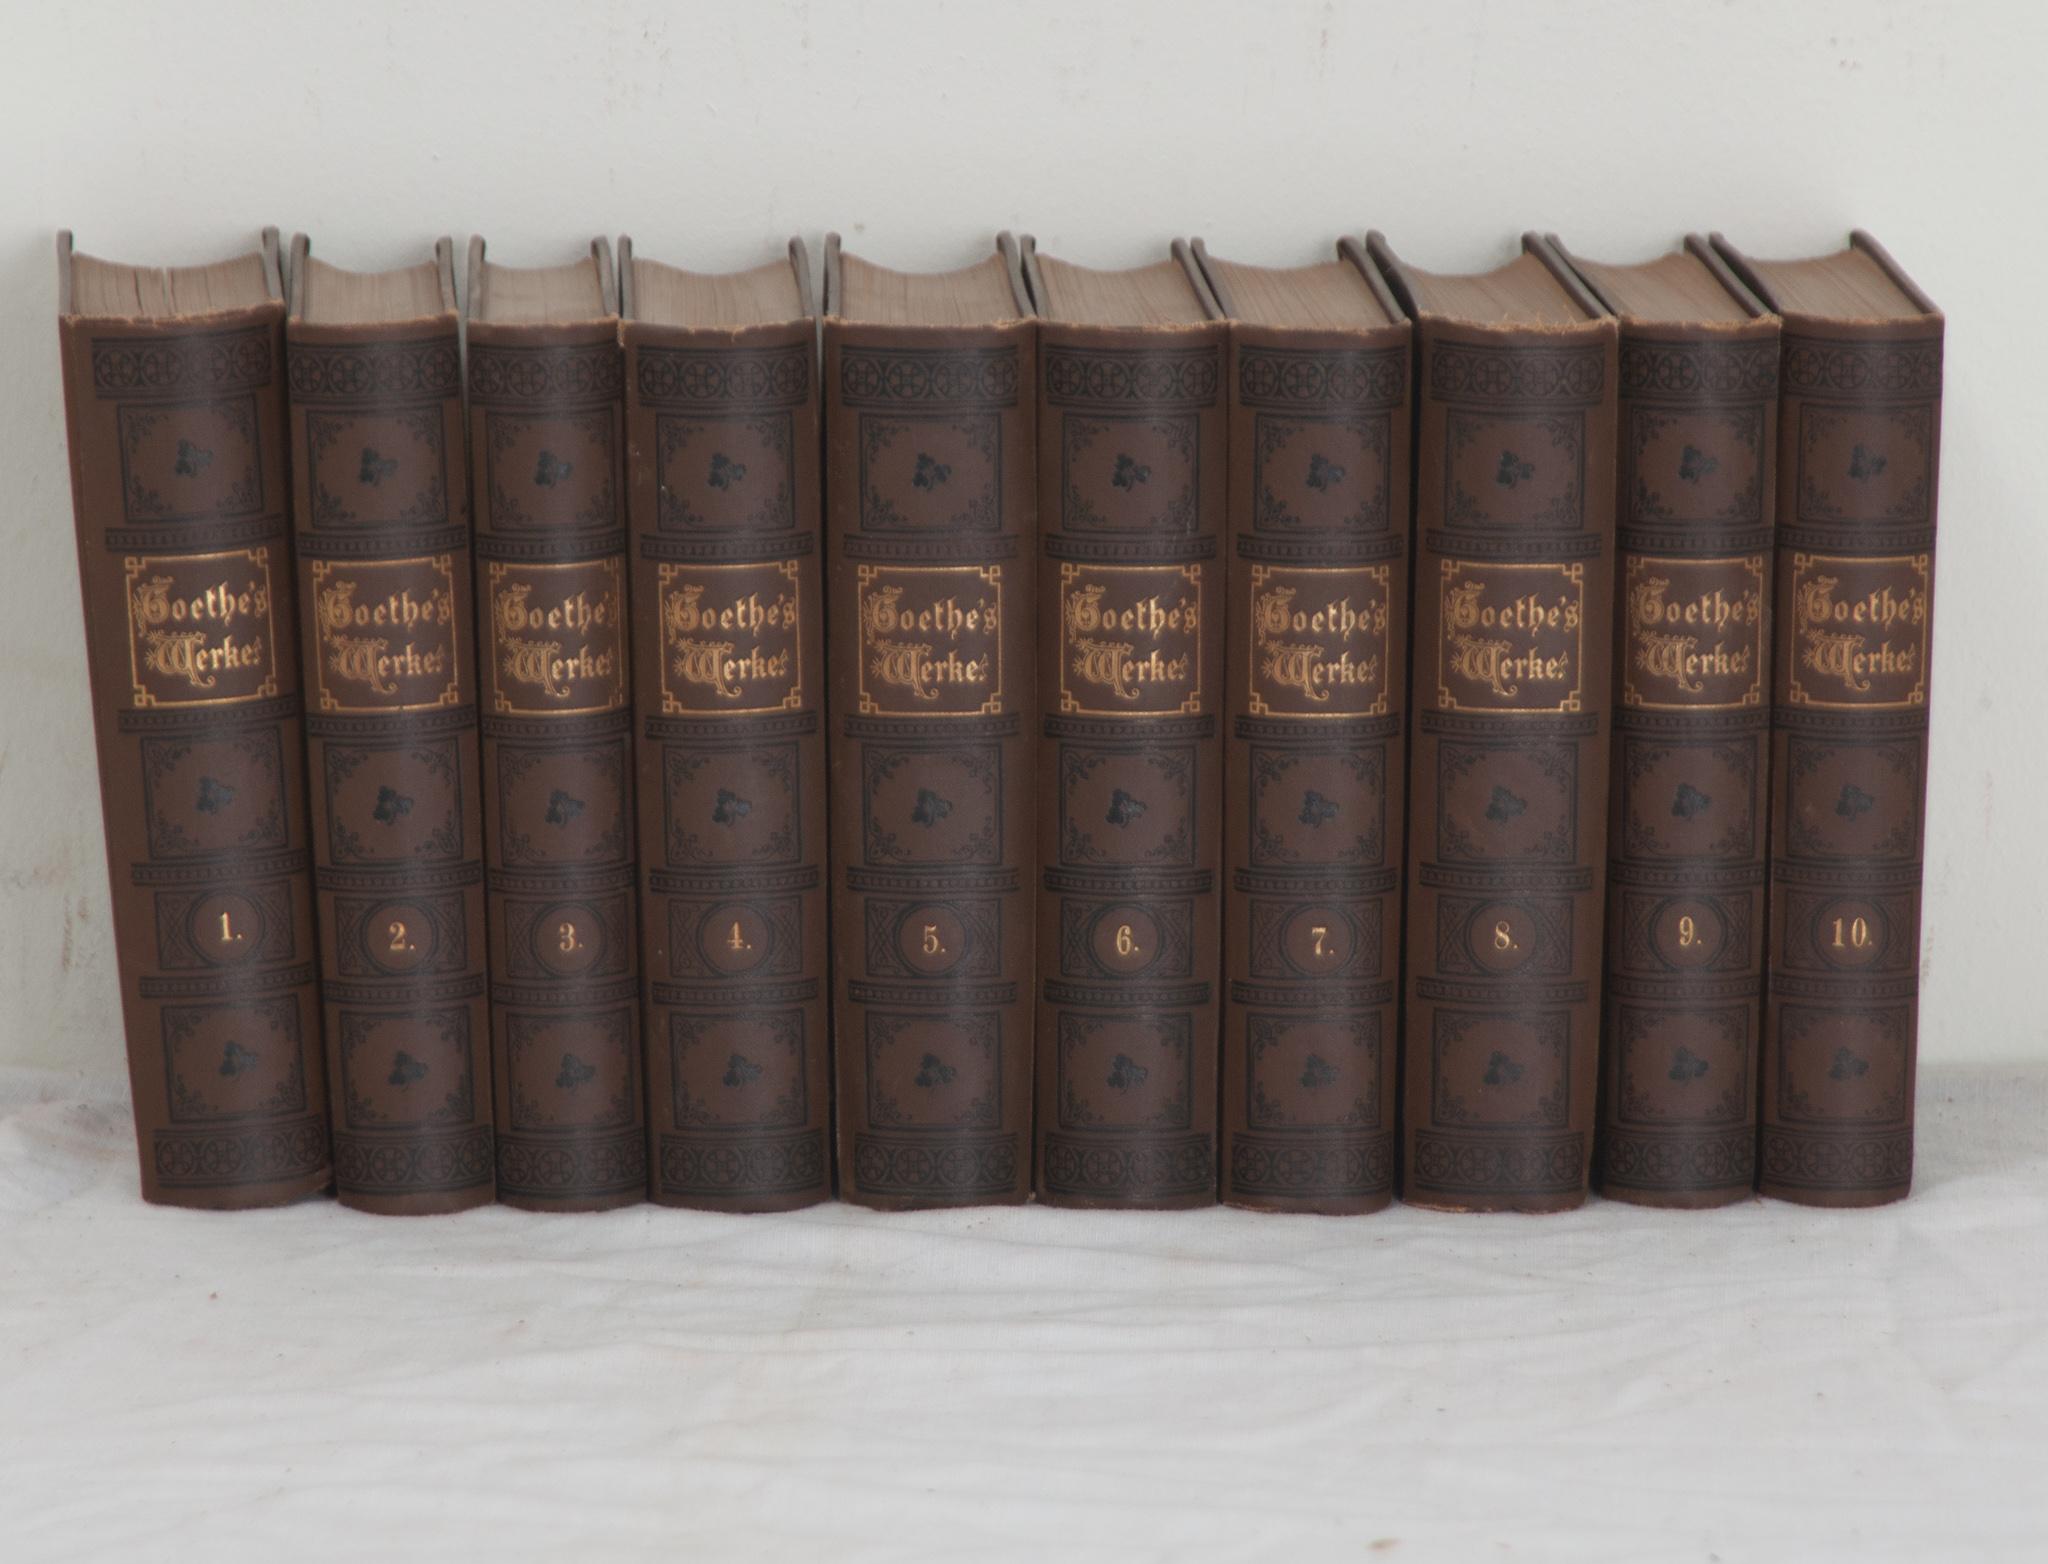 A collection of ten volumes of poetry by German playwright and poet Johann Wolfgang von Goethe. This set of Goethe’s Werkes is bound in pressed fabric with gold lettering. The pages have signs of discoloration, make sure to view the detailed images